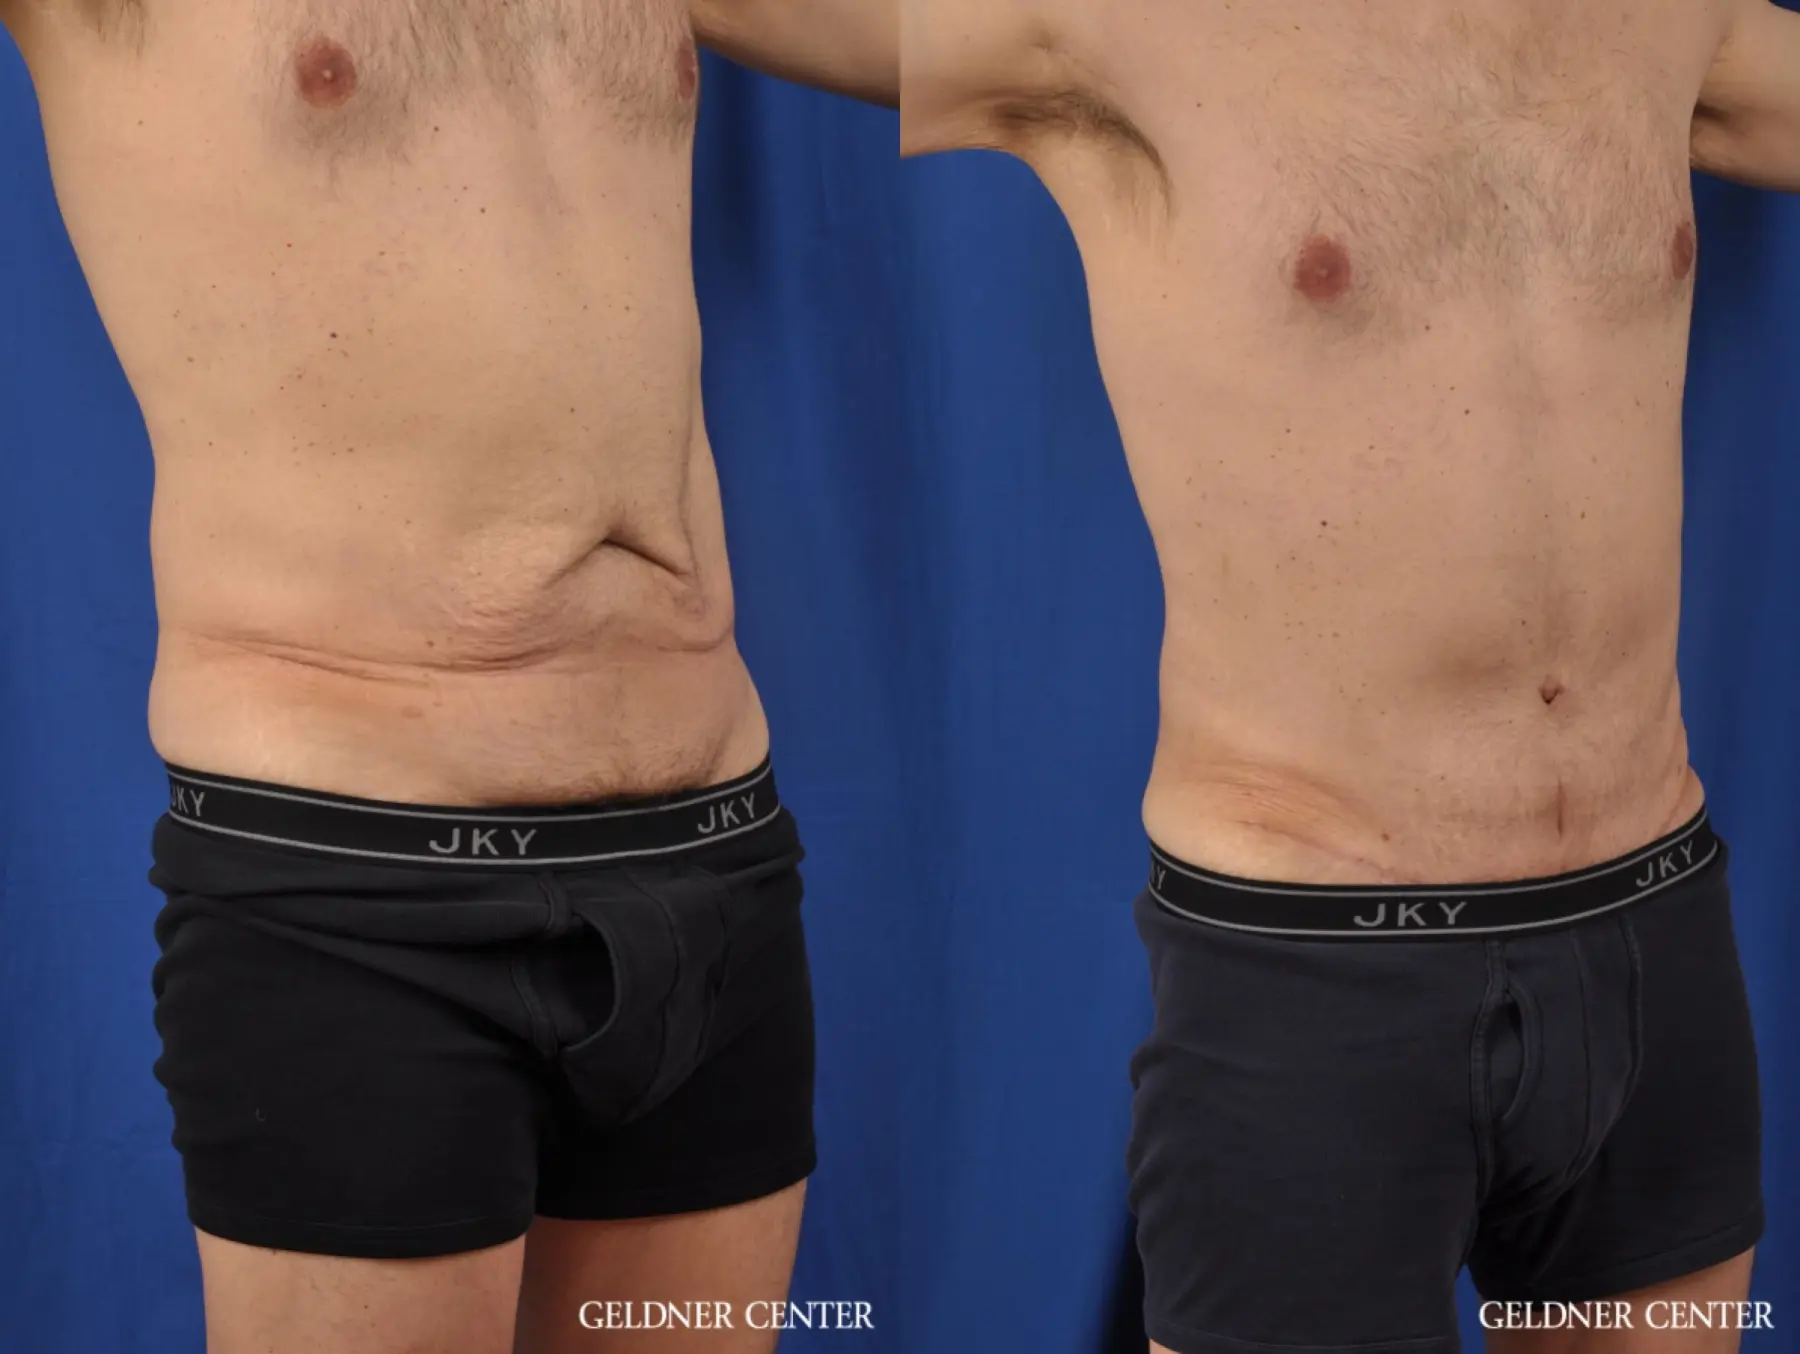 Abdominoplasty For Men: Patient 2 - Before and After 2